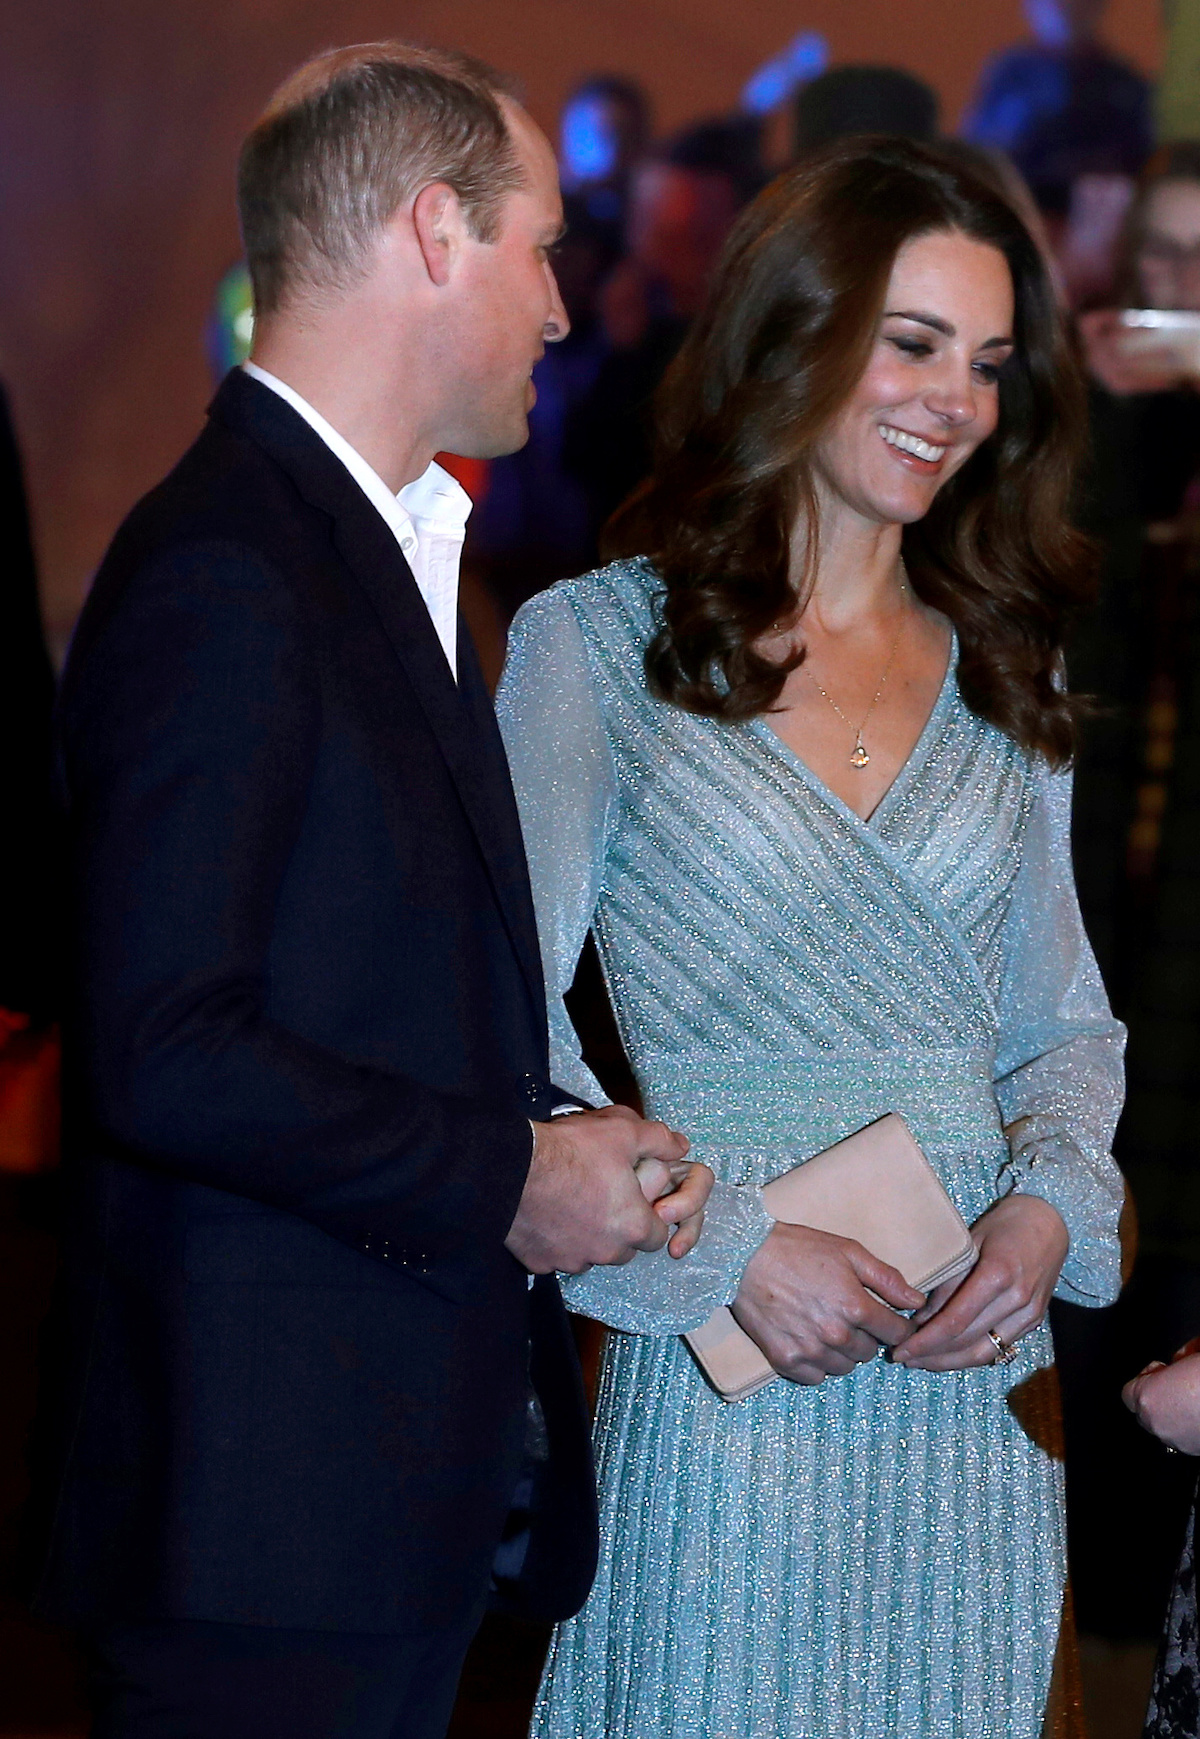 Britain's Prince William and Catherine Duchess of Cambridge visit to celebrate inspirational young people from Northern Ireland at the Empire Hall in Belfast, Northern Ireland February 27, 2019. REUTERS/Phil Noble 